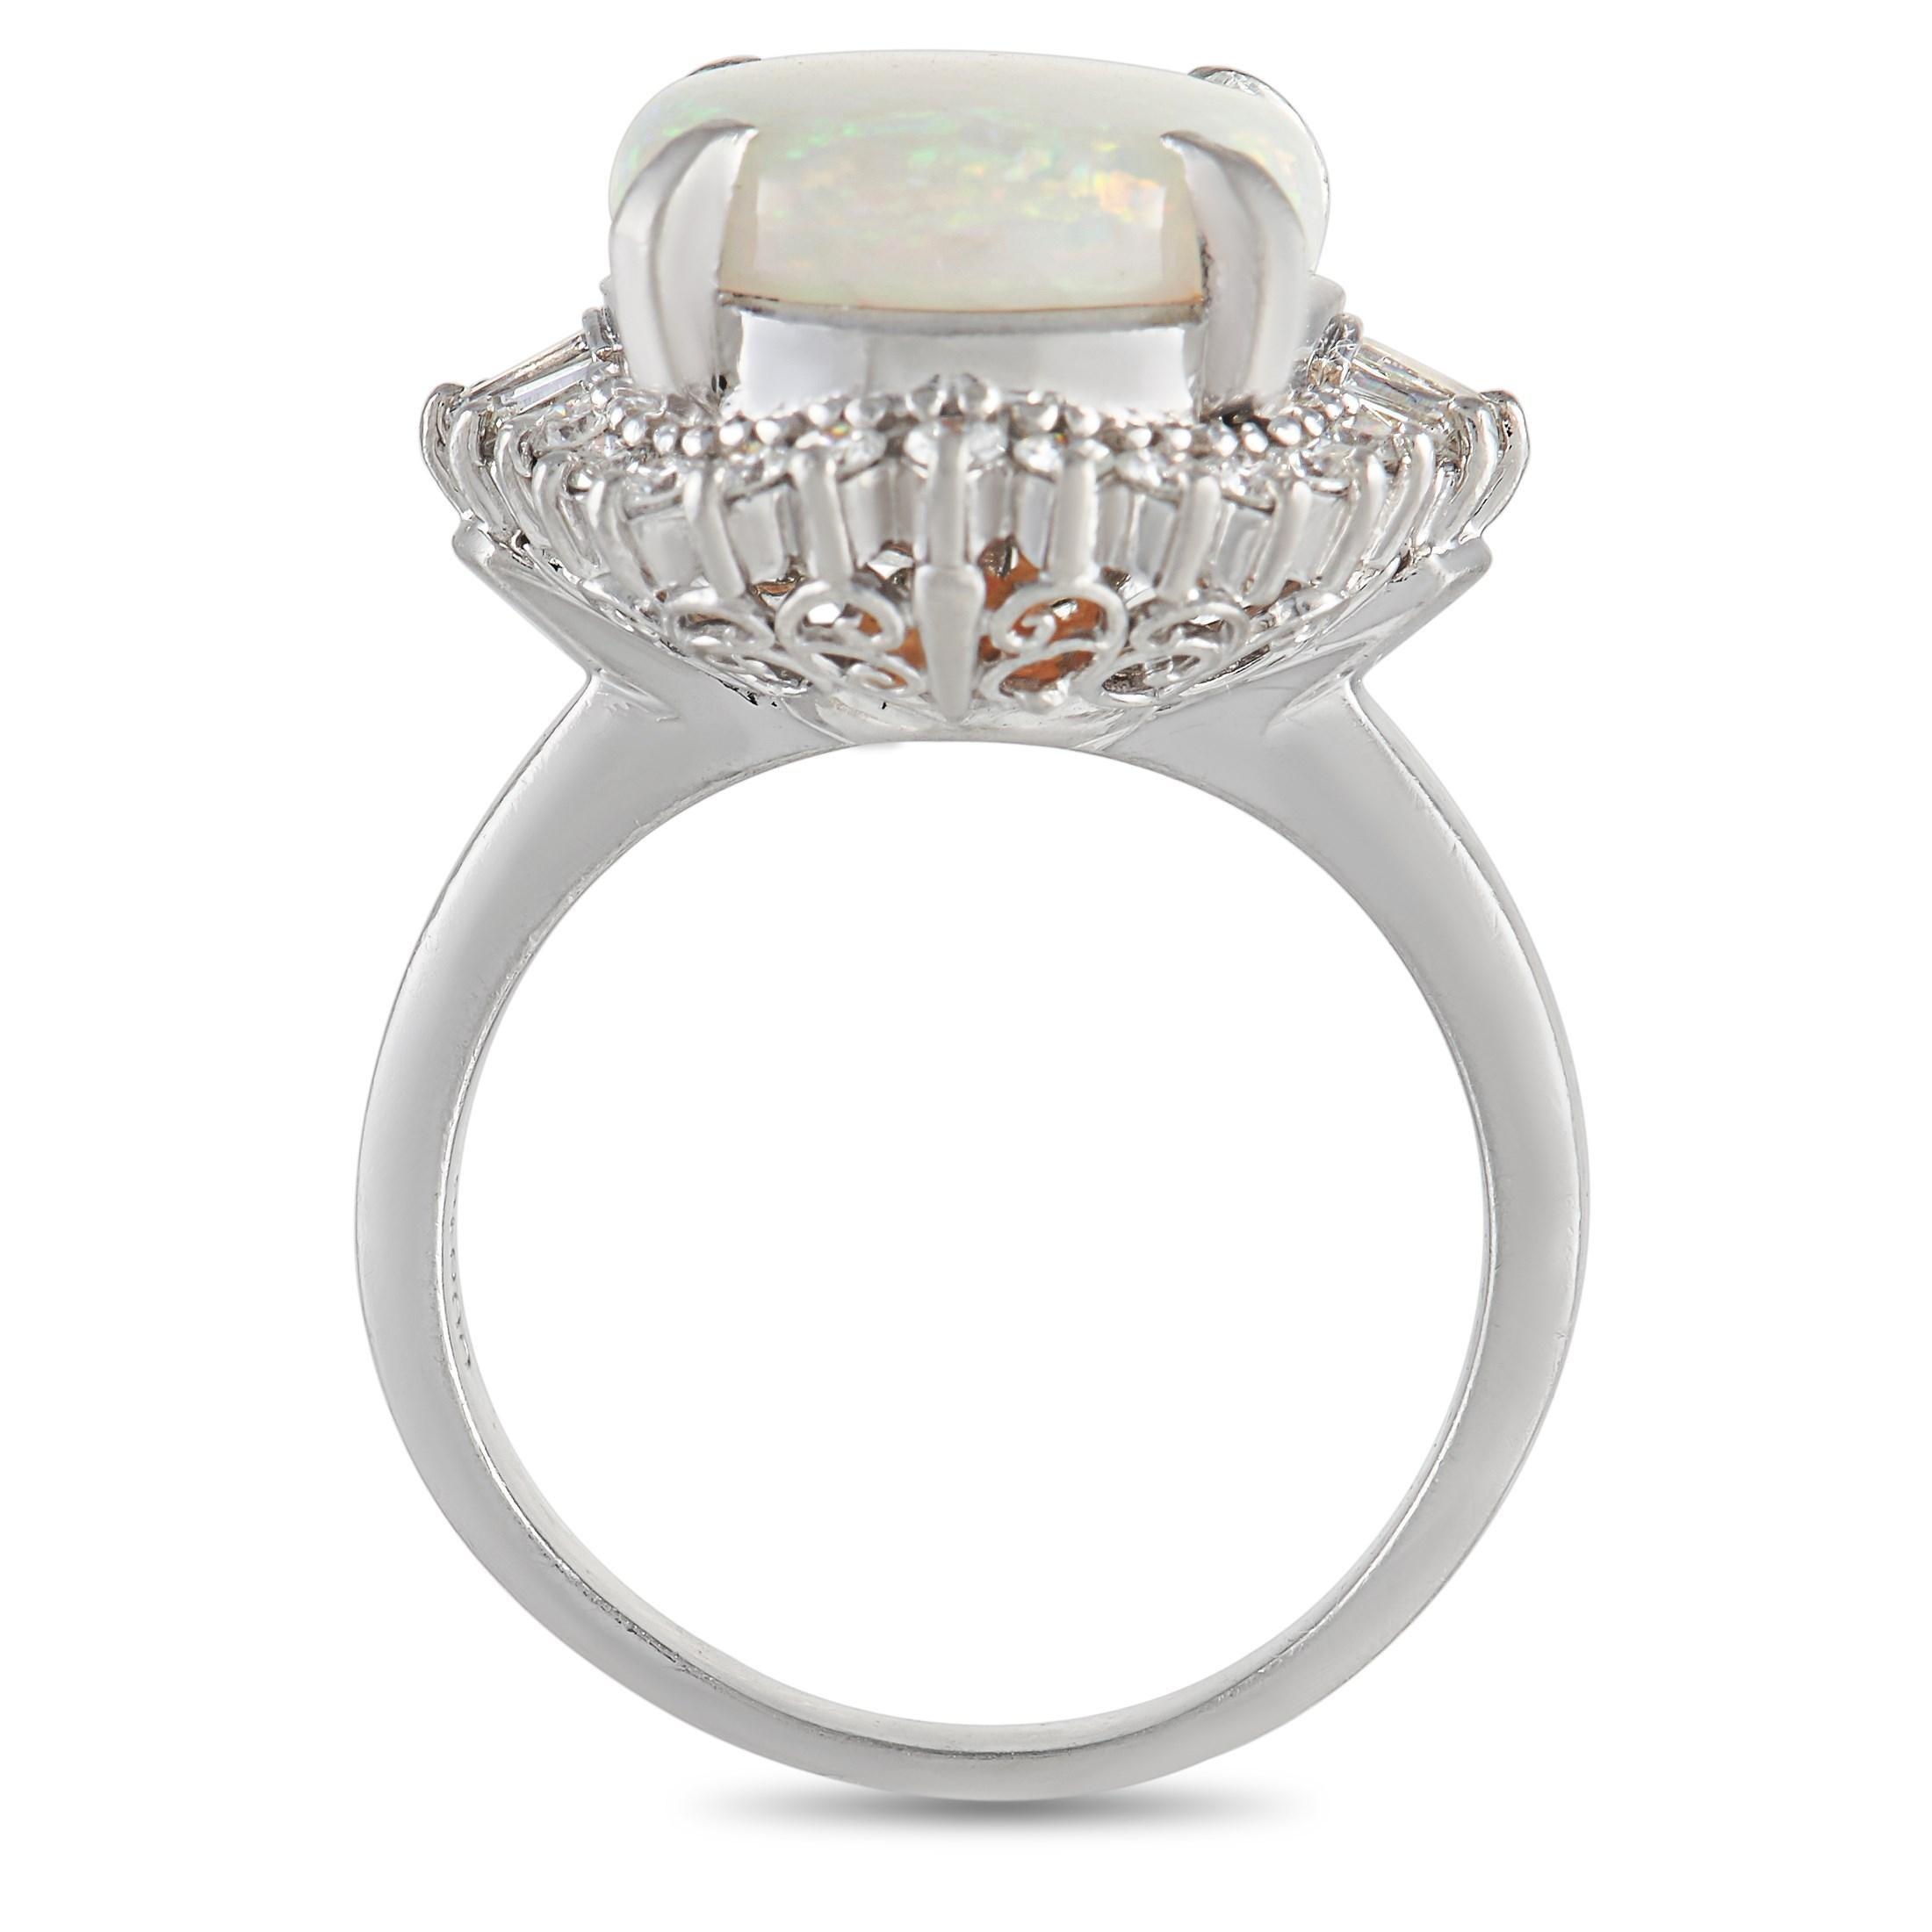 This enchanting ring will continually capture your imagination. A fiery 3.77 carat Opal center stone comes to life thanks to the dynamic halo of diamonds, which together possess a total weight of 0.57 carats. Crafted from Platinum, it features a 2mm